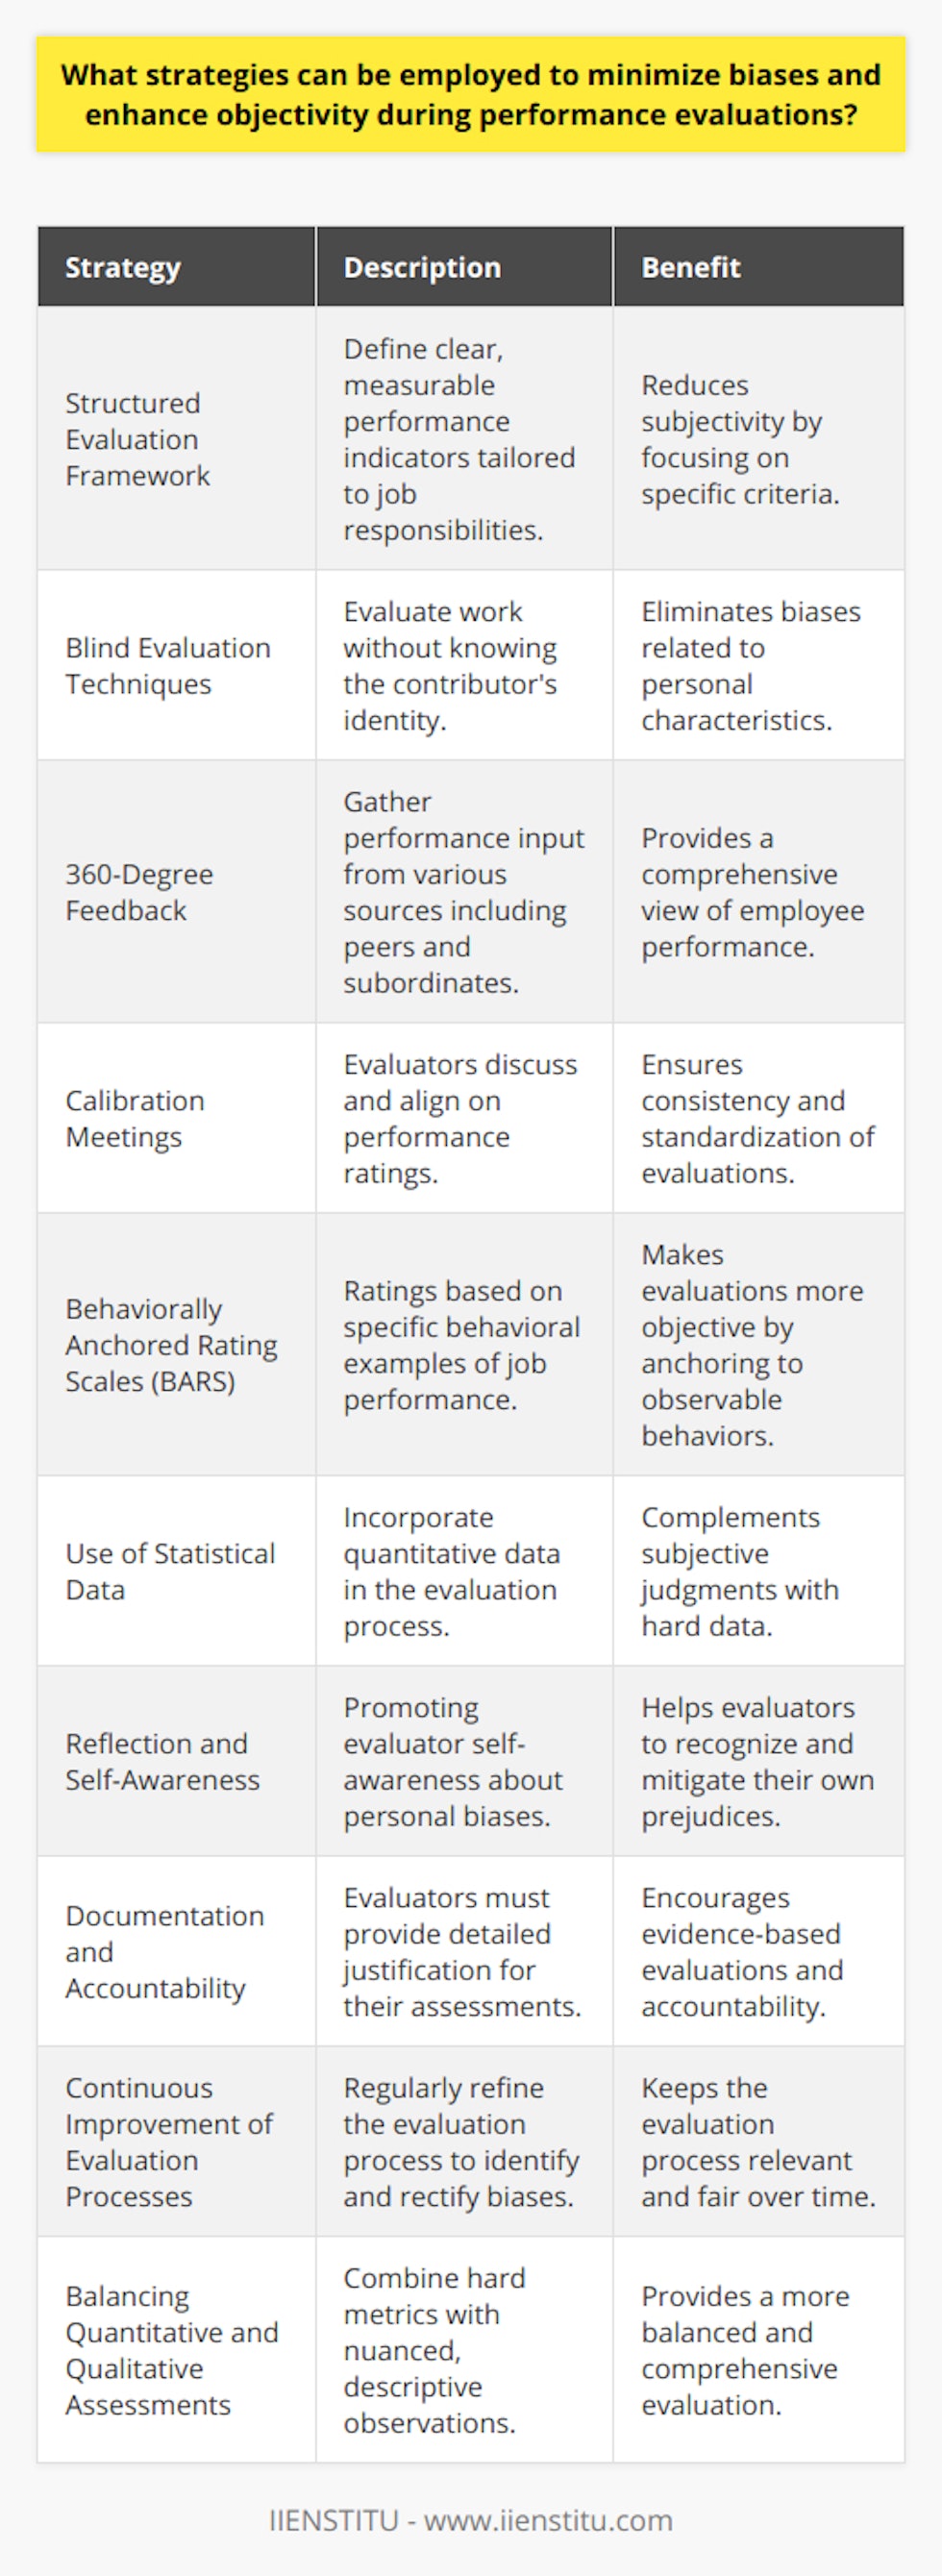 Strategies to Minimize Biases in Performance EvaluationsPerformance evaluations are essential for employee development and organizational growth. However, they are susceptible to various biases that can distort the appraisal process. To ensure that performance evaluations are fair and objective, specific strategies can be applied by organizations and their evaluators.Structured Evaluation FrameworkDeveloping a structured evaluation framework involves defining performance indicators that are observable, measurable, and directly relevant to an employee's job responsibilities. Consistently applied, this framework reduces discretion and forces evaluators to focus on predefined criteria, rather than subjective impressions.Blind Evaluation TechniquesWhenever possible, incorporating blind evaluation techniques can be effective. This may be practical in certain contexts, such as reviewing work samples or completed projects, where the evaluator is unaware of the employee's identity, thereby removing biases related to gender, race, ethnicity, or personality.360-Degree FeedbackA 360-degree feedback system incorporates input from all directions: supervisors, peers, subordinates, and sometimes even clients. It provides a rounded view of an employee's performance and can dilute the effect of one individual's bias.Calibration MeetingsRegular calibration meetings bring together evaluators to discuss and justify their ratings. These meetings promote consistency and ensure alignment with the company’s performance standards by allowing participants to compare and reconcile differences in evaluations.Behaviorally Anchored Rating Scales (BARS)BARS are rating systems that anchor evaluations in specific behavioral examples related to job performance. This method can help raters to make more objective assessments based on actual job behaviors rather than on general impressions or feelings about the employee.Use of Statistical DataIntegrating quantitative data into the evaluation process can complement subjective judgments. By analyzing productivity metrics, quality indicators, and other numerical data, evaluators can base their assessments on concrete evidence of performance.Reflection and Self-AwarenessEncouraging self-awareness and reflection among evaluators about their own potential biases is vital. Reflective practices, possibly guided by resources from organizations like IIENSTITU, can help individuals recognize and control personal prejudices that could color their judgment.Documentation and AccountabilityRequiring evaluators to provide detailed documentation of their assessments encourages them to justify their decisions. Knowing their assessment must stand up to scrutiny incentivizes evaluators to base their decisions on evidence rather than personal biases.Continuous Improvement of Evaluation ProcessesRegularly reviewing and updating the evaluation process can uncover and address biases that may have crept in. This strategy requires a commitment to continuous improvement and may involve seeking feedback from employees about their experience of the evaluation process.Balancing Quantitative and Qualitative AssessmentsCombining both quantitative metrics and qualitative observations can balance out the potential biases of each. For instance, while numbers provide hard data, narratives can capture the nuances of an employee’s performance that numbers alone might miss.By employing these strategies, organizations can make significant strides toward minimizing biases and enhancing the objectivity of performance evaluations. The goal is to create a performance review culture that not only promotes fair assessments but also contributes to a more inclusive and engaging workplace.